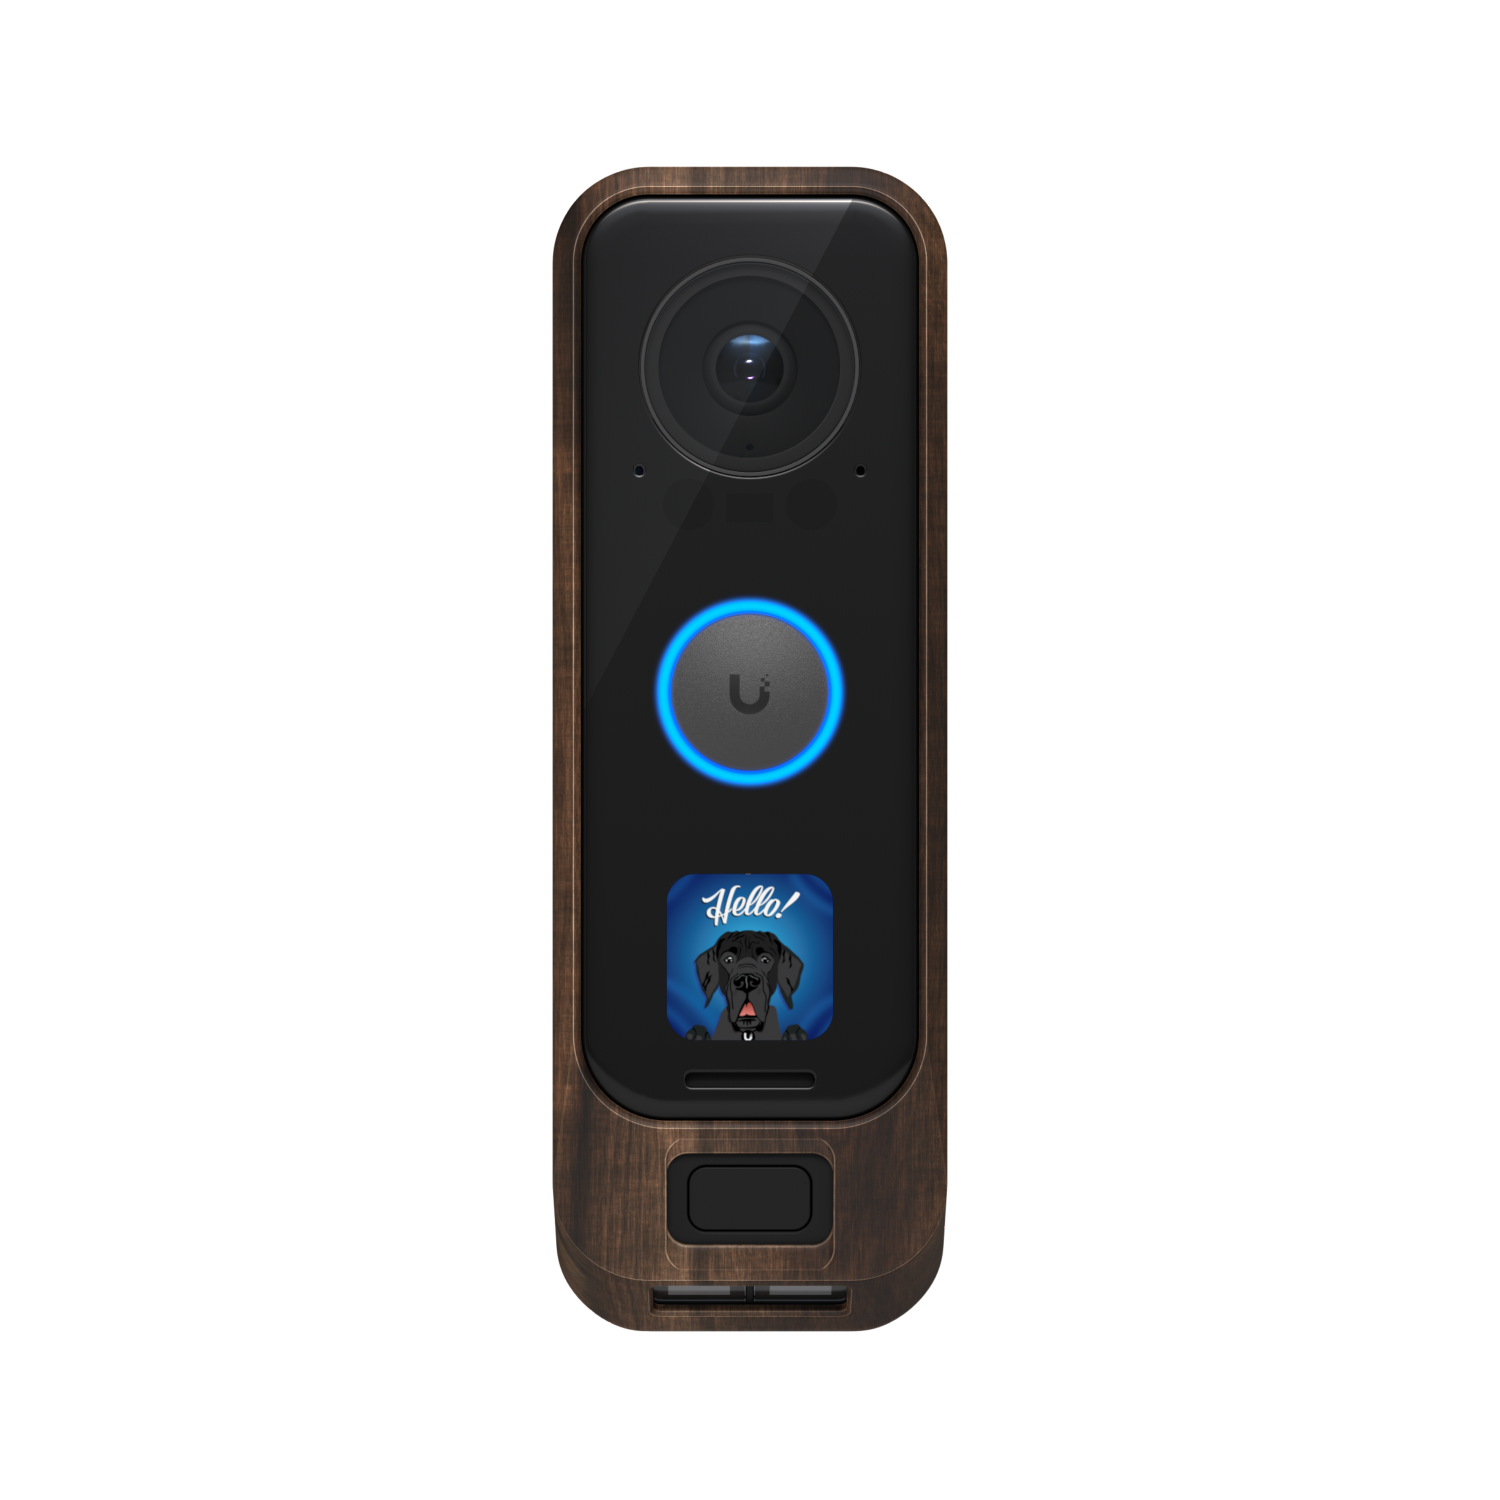 Ubiquiti Unifi G4 Doorbell Pro Cover/for the G4 Doorbell Pro/ UACC-G4-DB-Pro-Cover-Wood